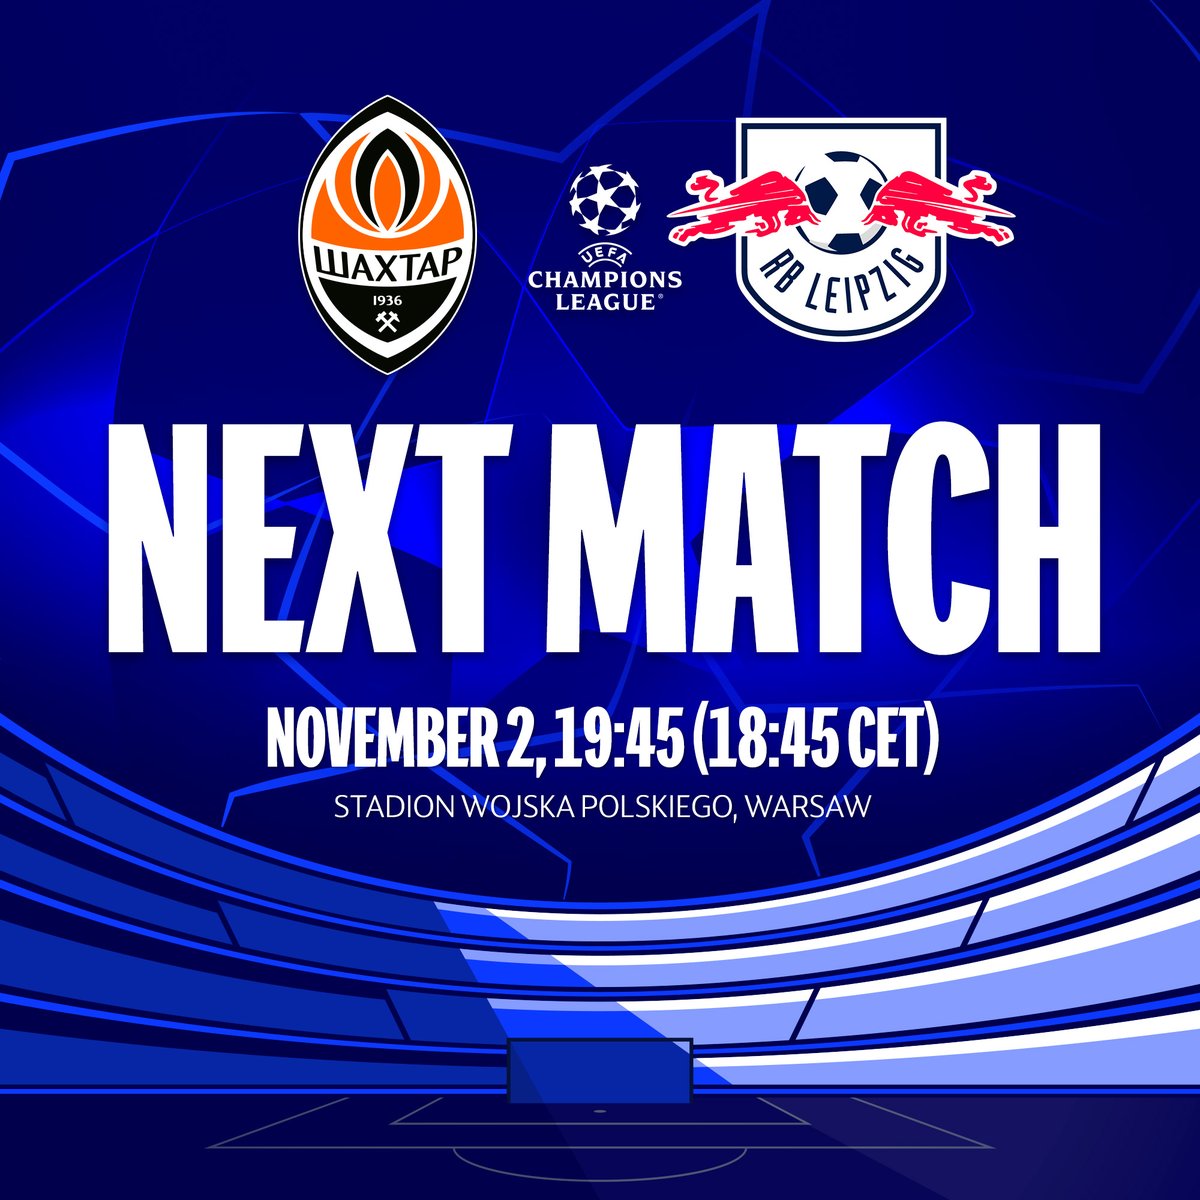 🔥 The decisive battle of the @ChampionsLeague on Wednesday! ⭐️ ⚽️ #ShakhtarRBL 🏆 UCL, group stage, 6th round 📅 November 2 ⏰ 18:45 CET 📍 Stadion Wojska Polskiego, Warsaw #Shakhtar | #UCL